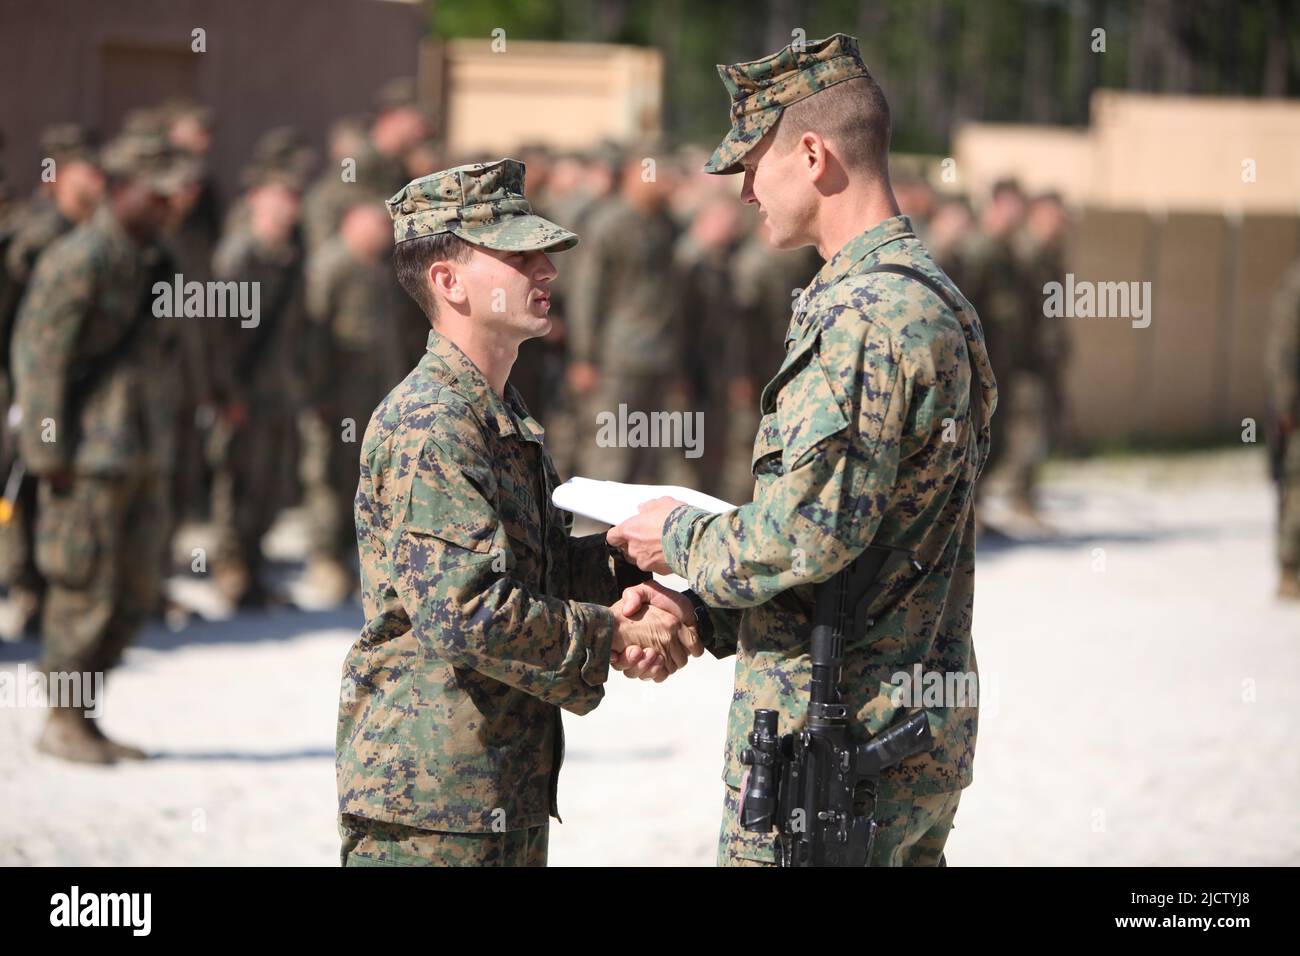 U.S. Marine Corps Corporal Christopher Metts (left) with Charlie Company, 1st Battalion, 8th Marine Regiment (1/8), 2D Marine Division, receives his p Stock Photo